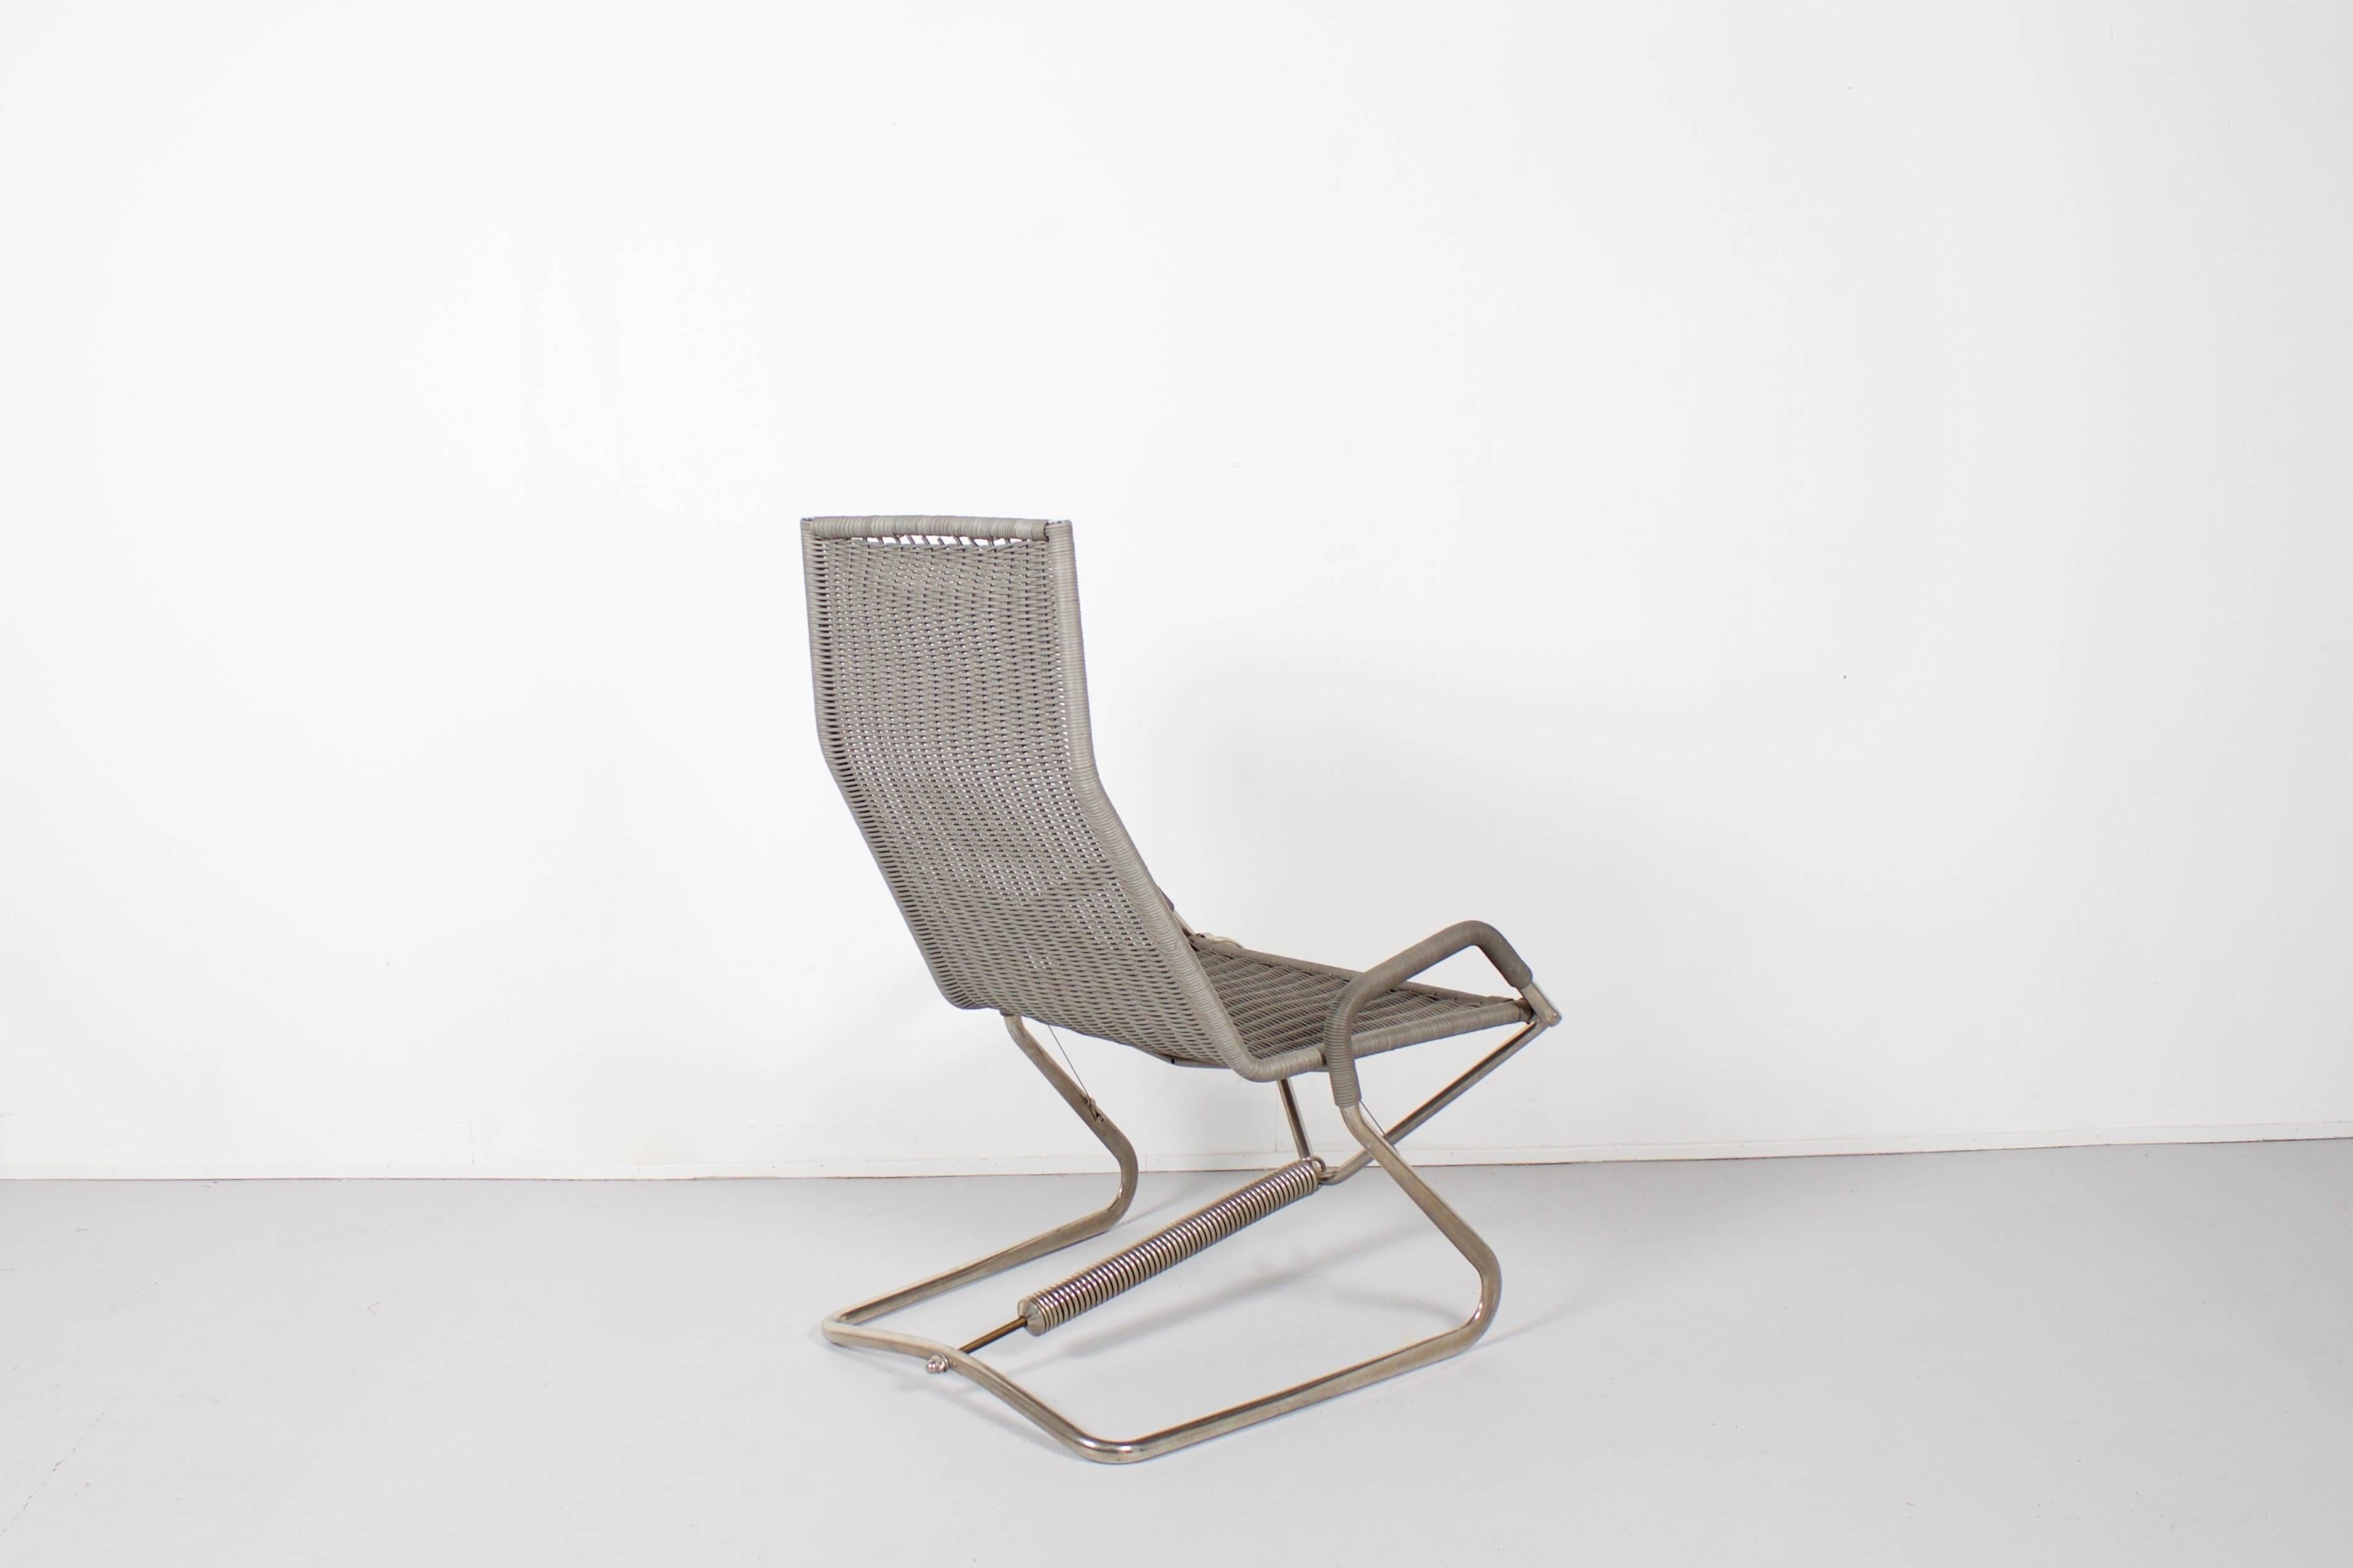 Tecta D36 floating chair by Jean Prouvé in very good condition.

The chair has a chrome-plated frame with a grey papercord seat and back.

It is equipped with a heavy spring which can be adjusted to the weight of the person who sits in it.
By